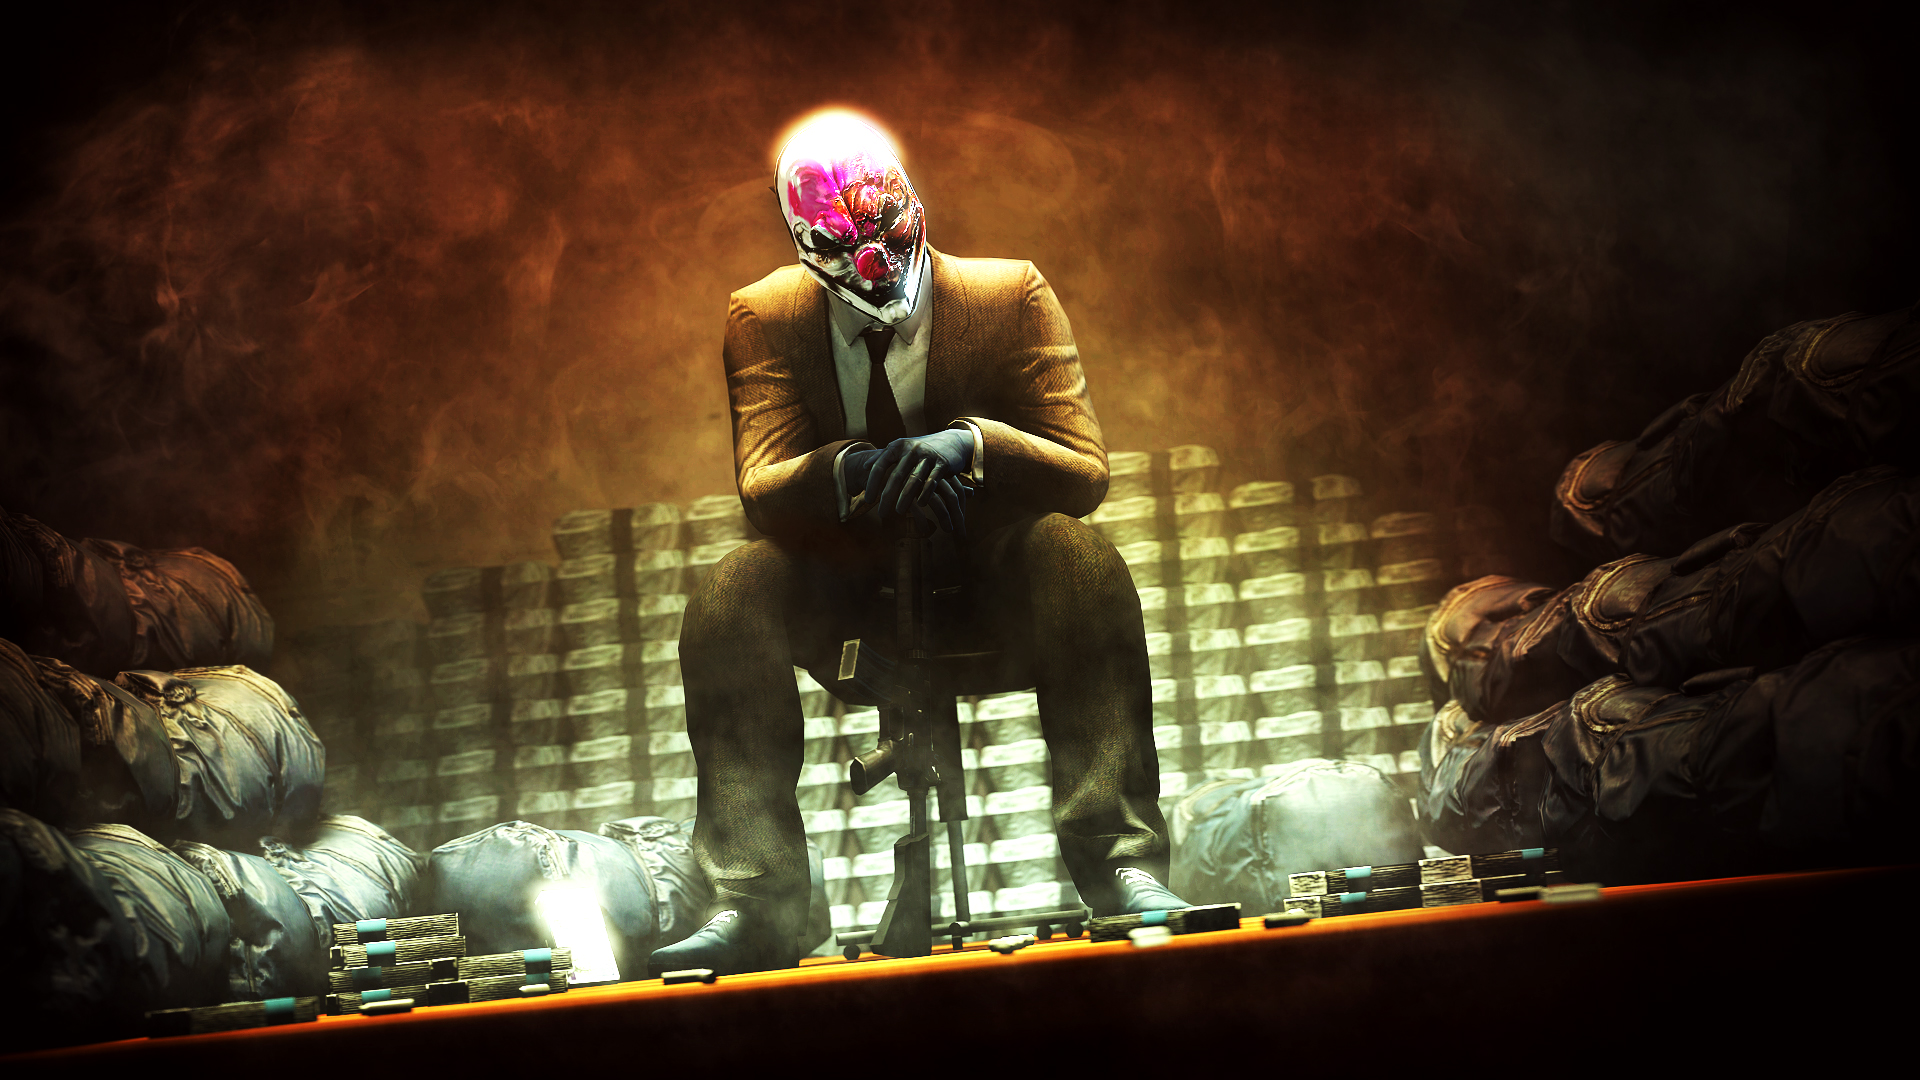 hoxton (payday), payday 2, video game, payday